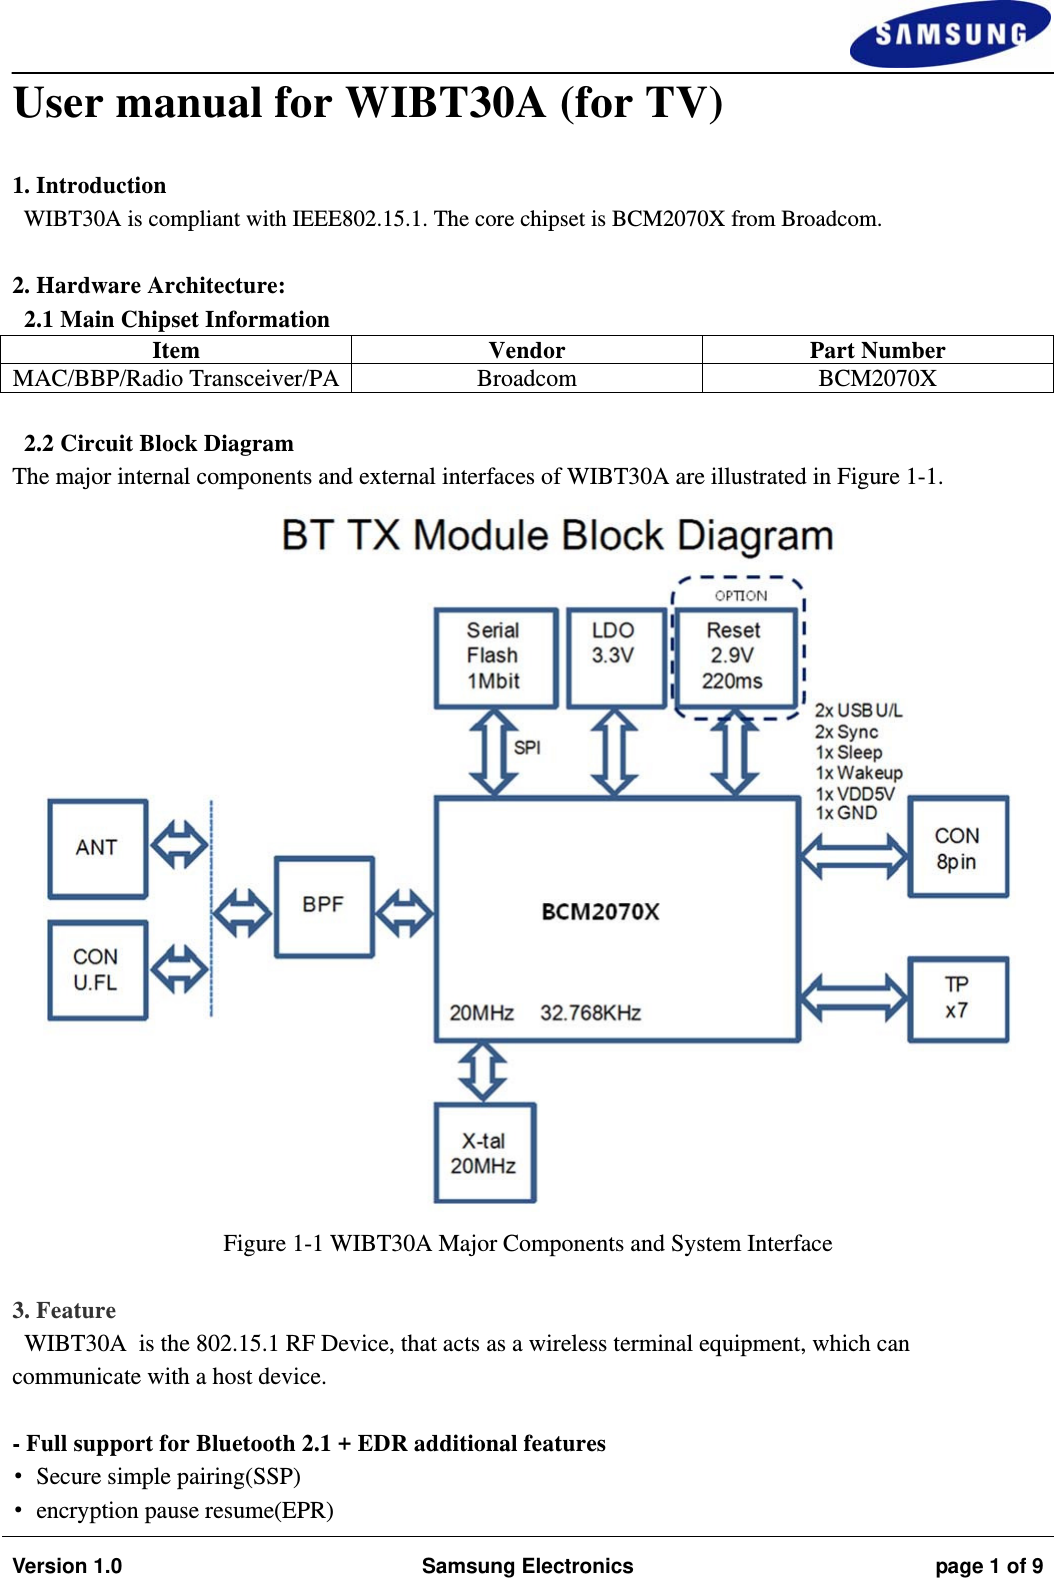                                                                                                                                                                    Version 1.0  Samsung Electronics  page 1 of 9  User manual for WIBT30A (for TV)  1. Introduction WIBT30A is compliant with IEEE802.15.1. The core chipset is BCM2070X from Broadcom.  2. Hardware Architecture: 2.1 Main Chipset Information Item Vendor Part Number MAC/BBP/Radio Transceiver/PA Broadcom BCM2070X  2.2 Circuit Block Diagram The major internal components and external interfaces of WIBT30A are illustrated in Figure 1-1.  Figure 1-1 WIBT30A Major Components and System Interface  3. Feature WIBT30A  is the 802.15.1 RF Device, that acts as a wireless terminal equipment, which can communicate with a host device.  - Full support for Bluetooth 2.1 + EDR additional features •Secure simple pairing(SSP) •encryption pause resume(EPR) 